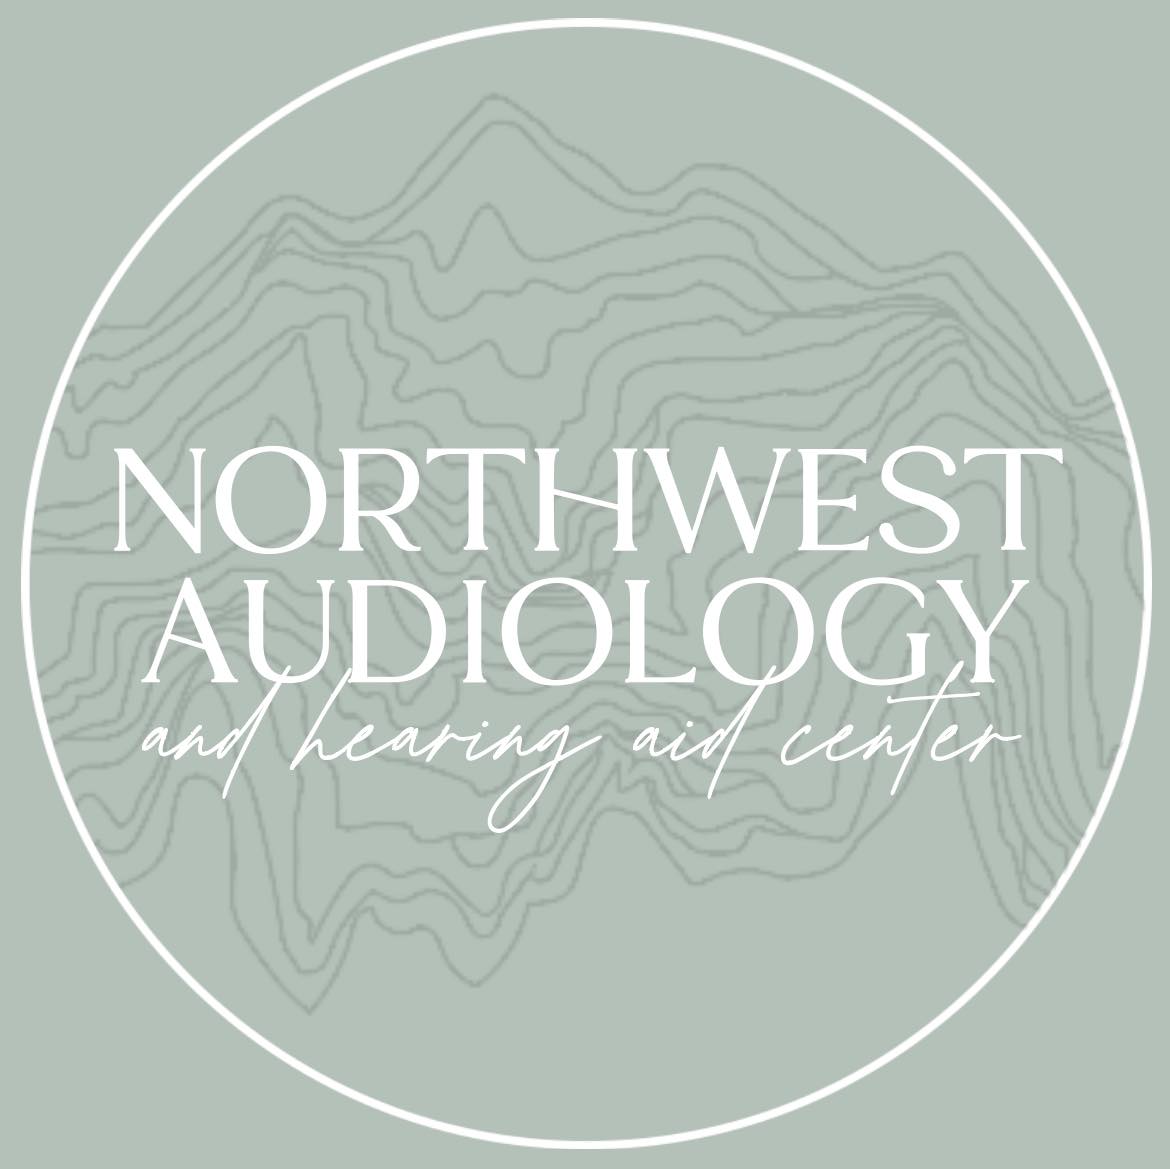 Private Practice Audiologist - Beautiful Pacific Northwest